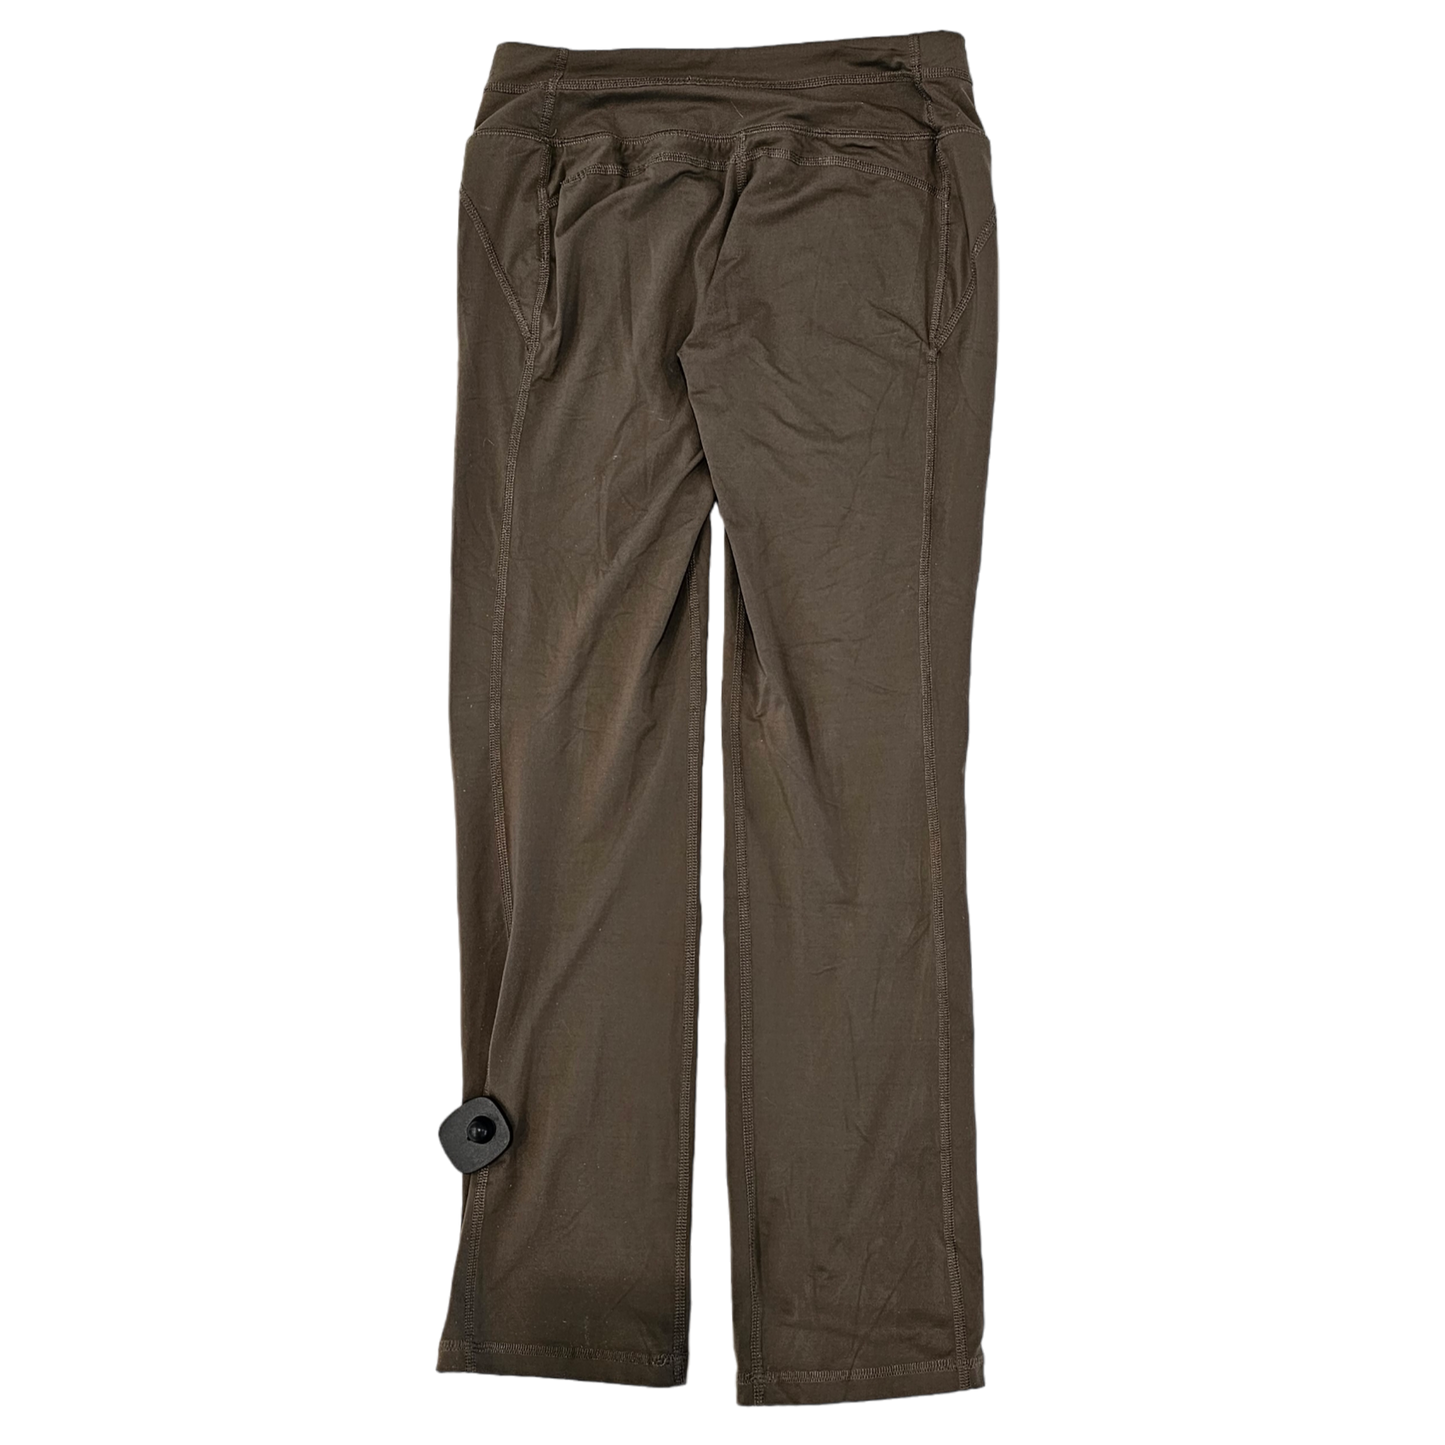 Athletic Pants By Lands End  Size: S